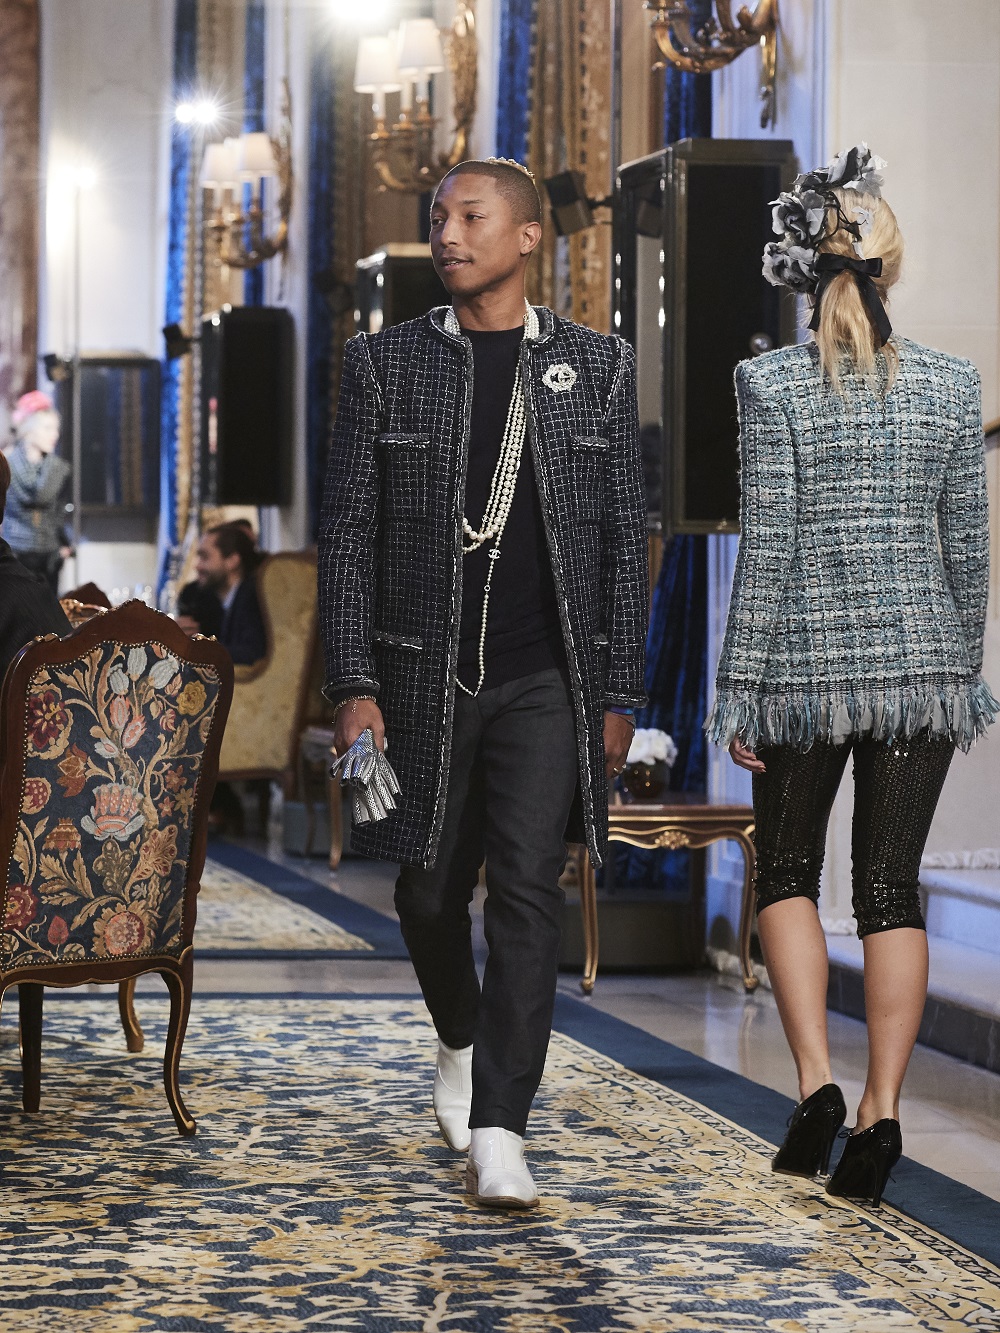 Pharrell Williams on the runway at Chanel's pre-fall 2017 collection at The Ritz